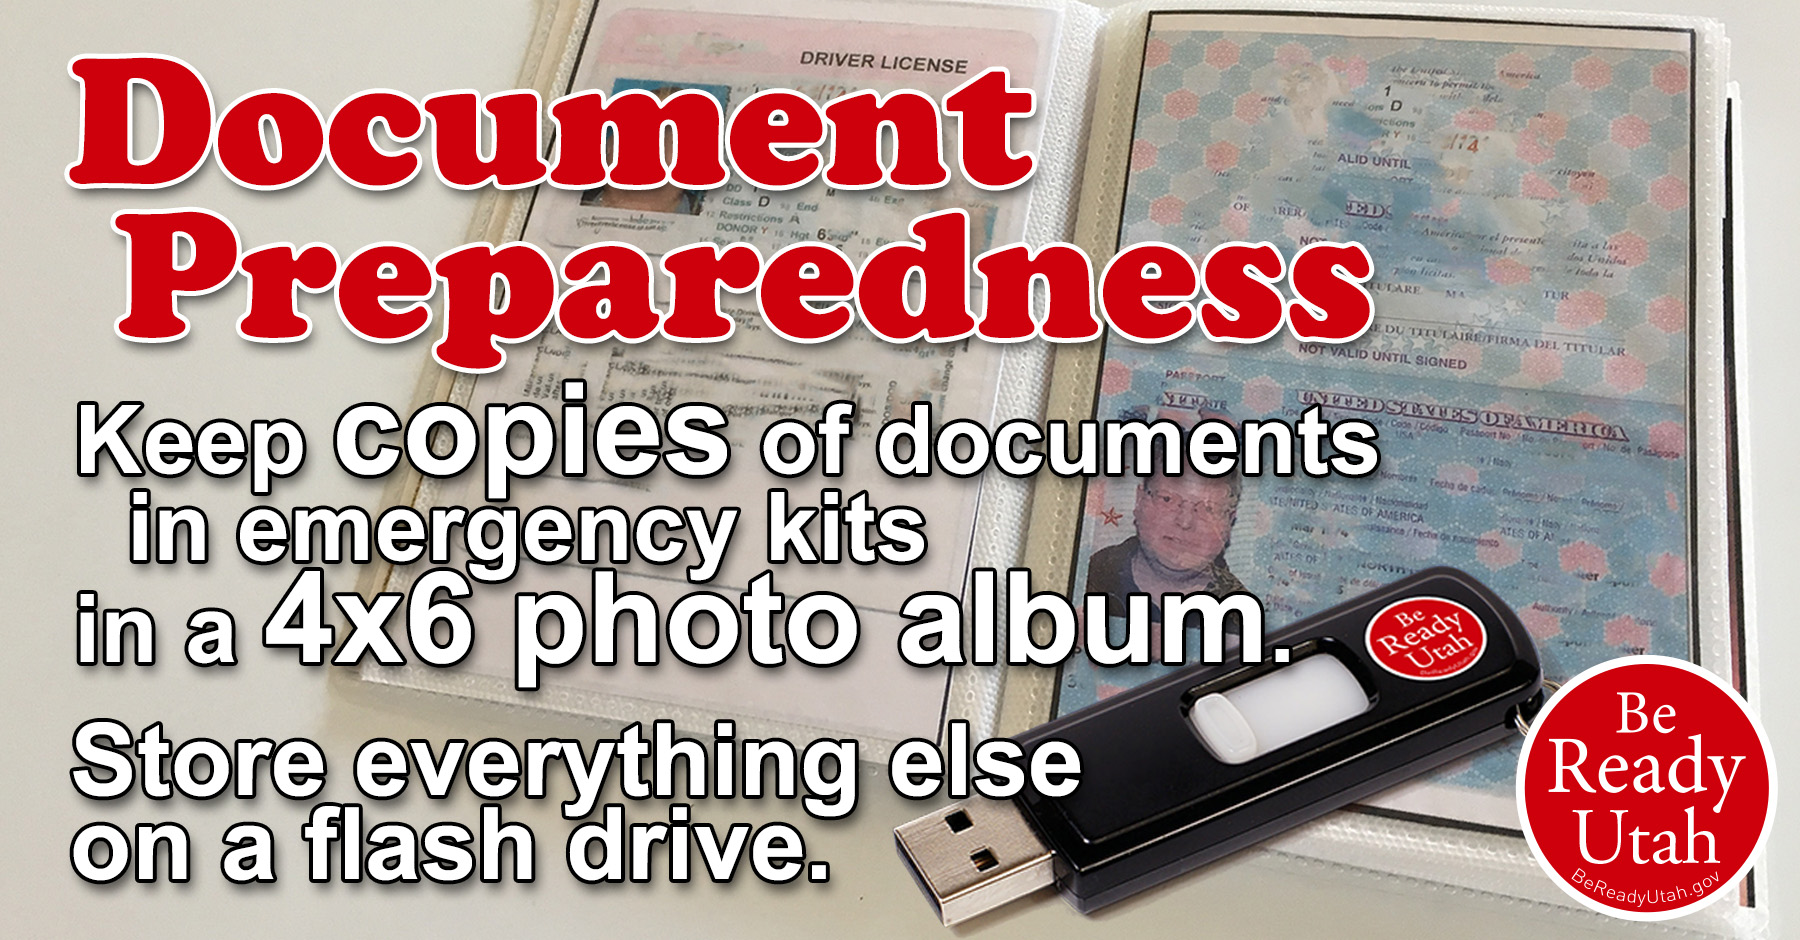 Keep documents in emergency kits in printed photo albums and on a flash drive